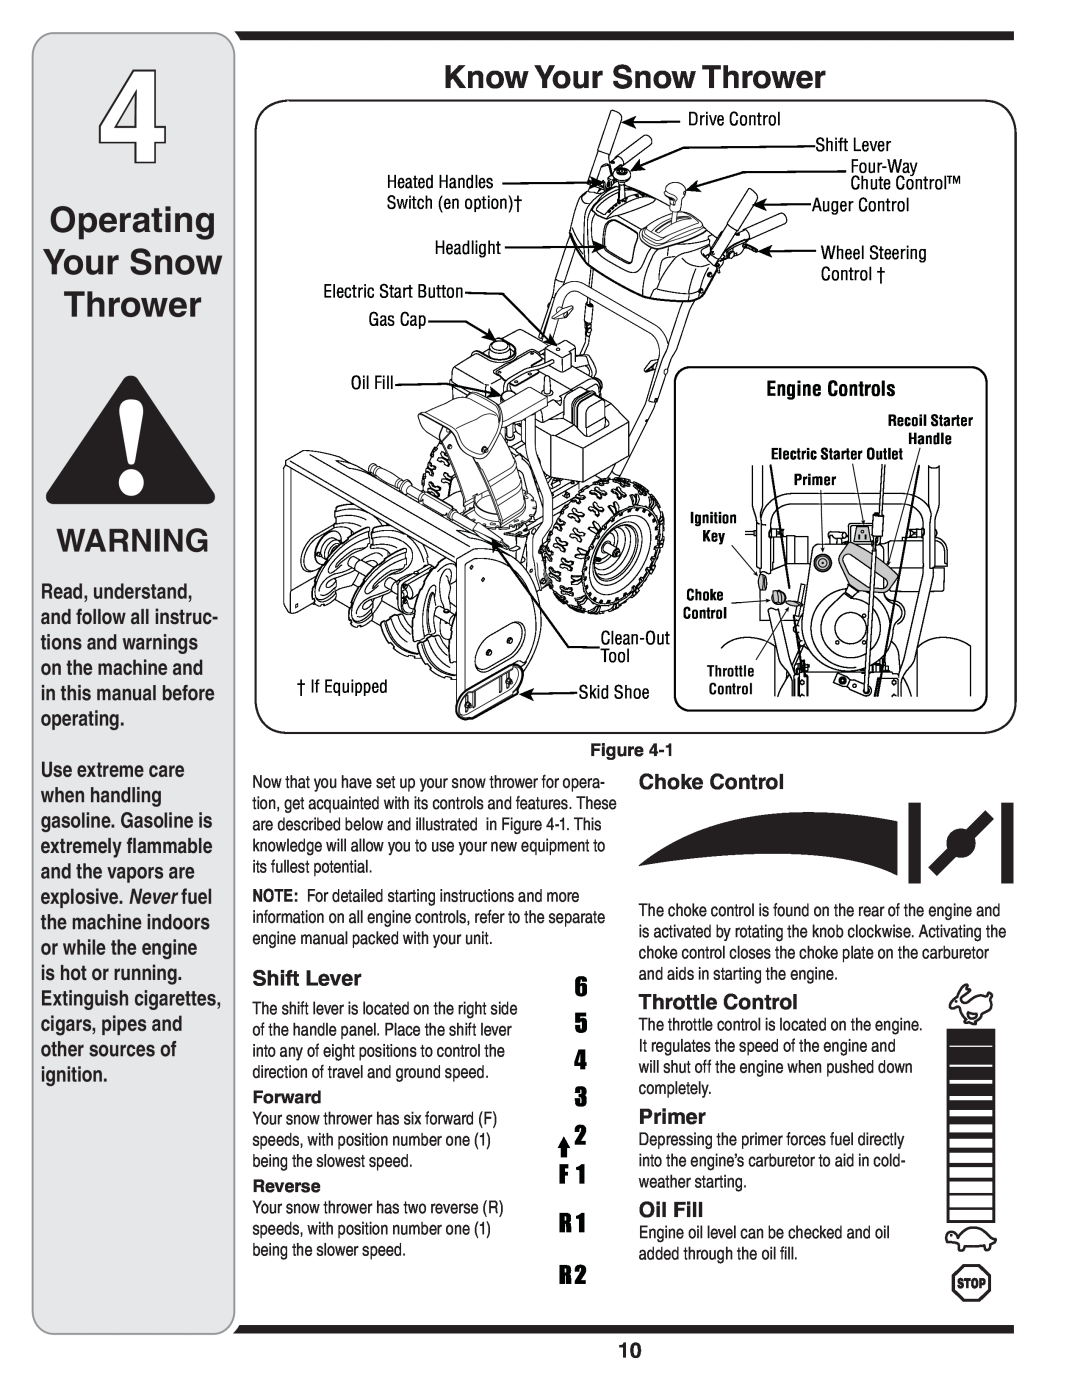 MTD 769-03265 warranty Operating Your Snow Thrower, Know Your Snow Thrower, Figure, Forward, Reverse 